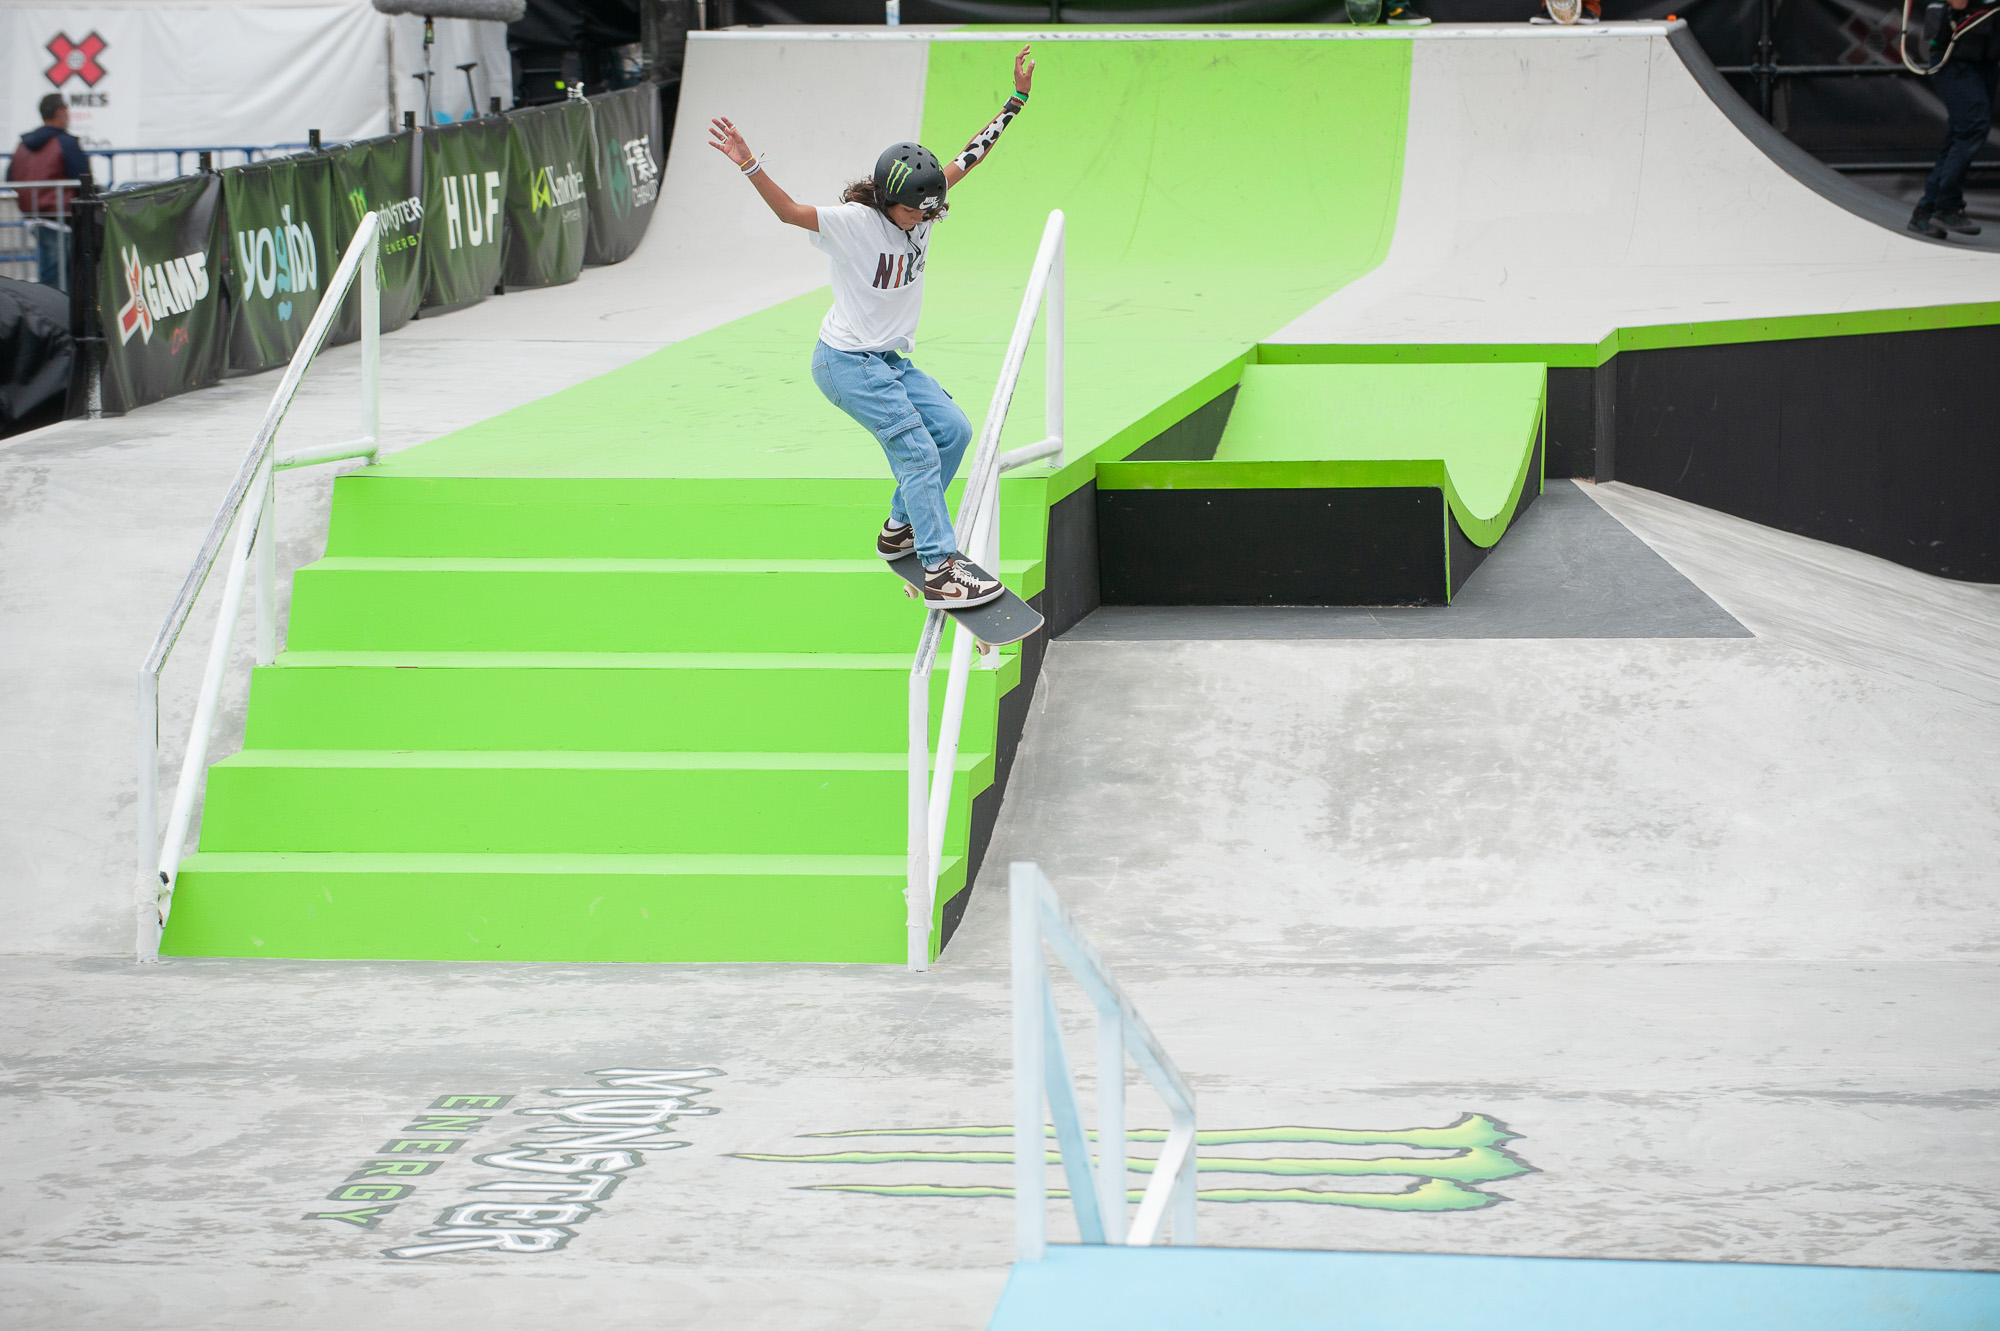 Monster Energy's Rayssa Leal Claims Gold in Women's Skateboard Street at X Games Chiba 2022